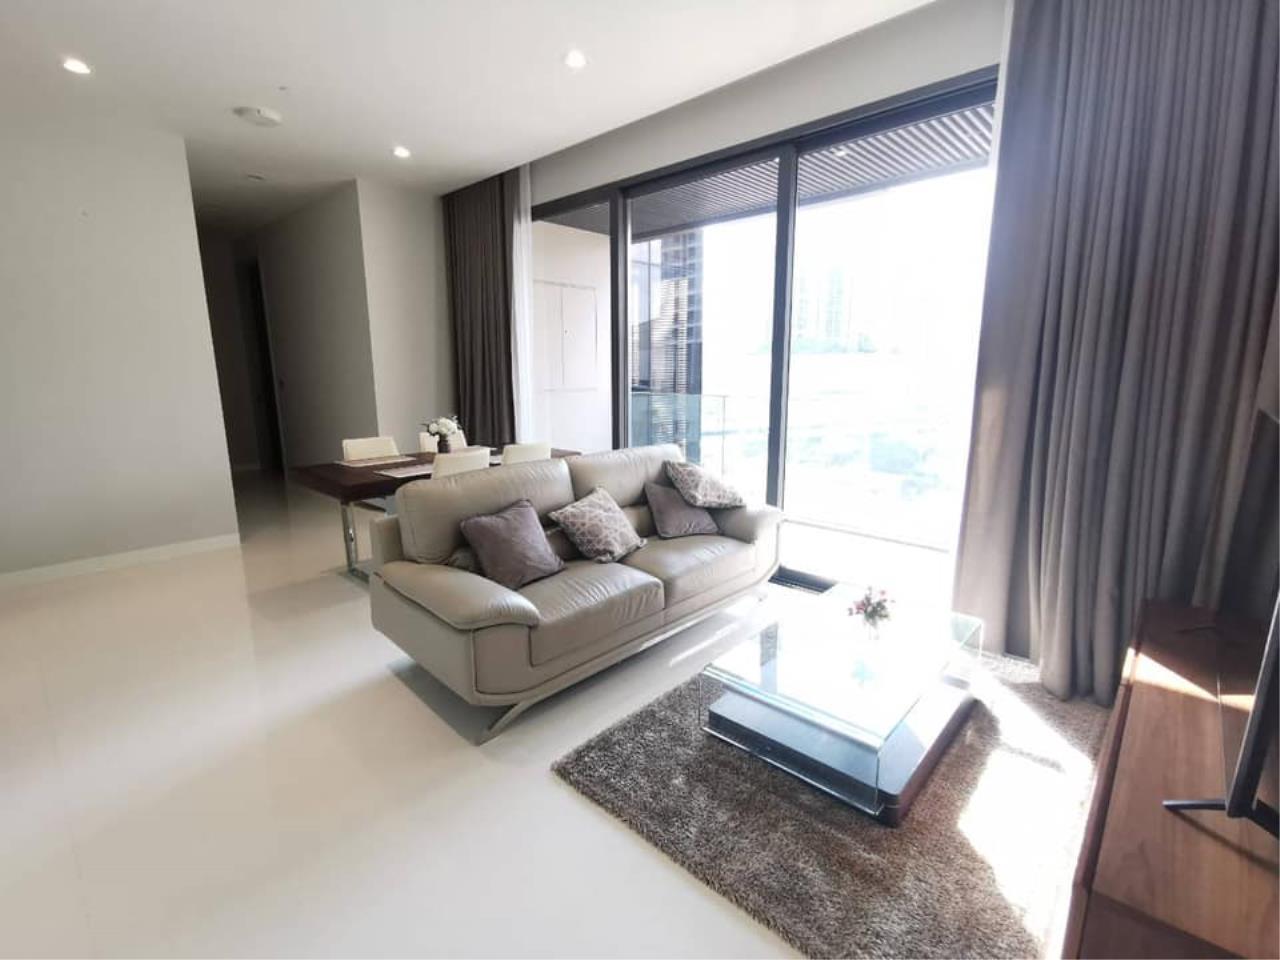 2 bedrooms 2 bathrooms at vittorio sukhumvit 39 for rent and sale (1)